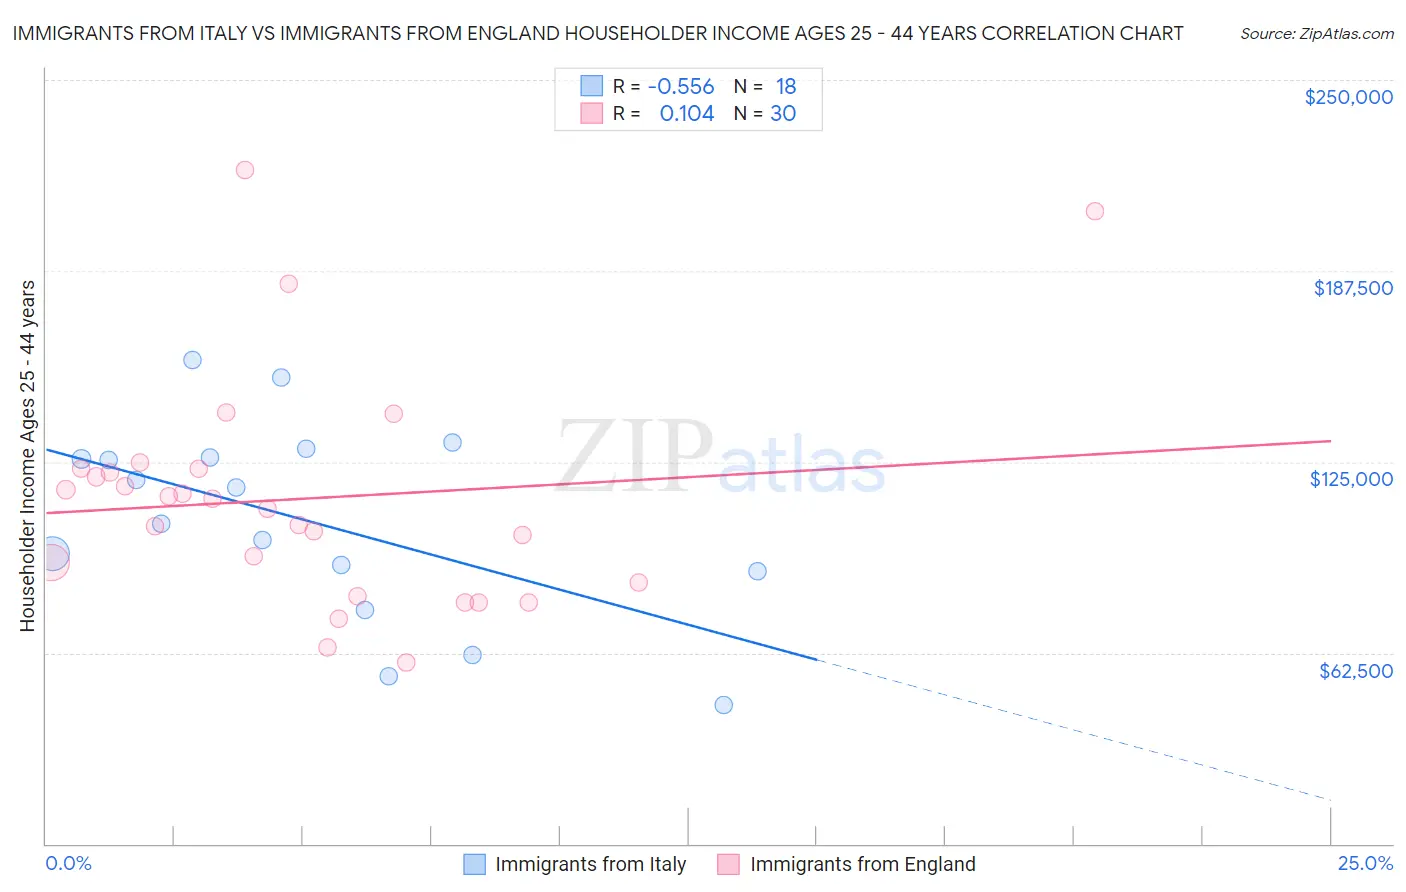 Immigrants from Italy vs Immigrants from England Householder Income Ages 25 - 44 years